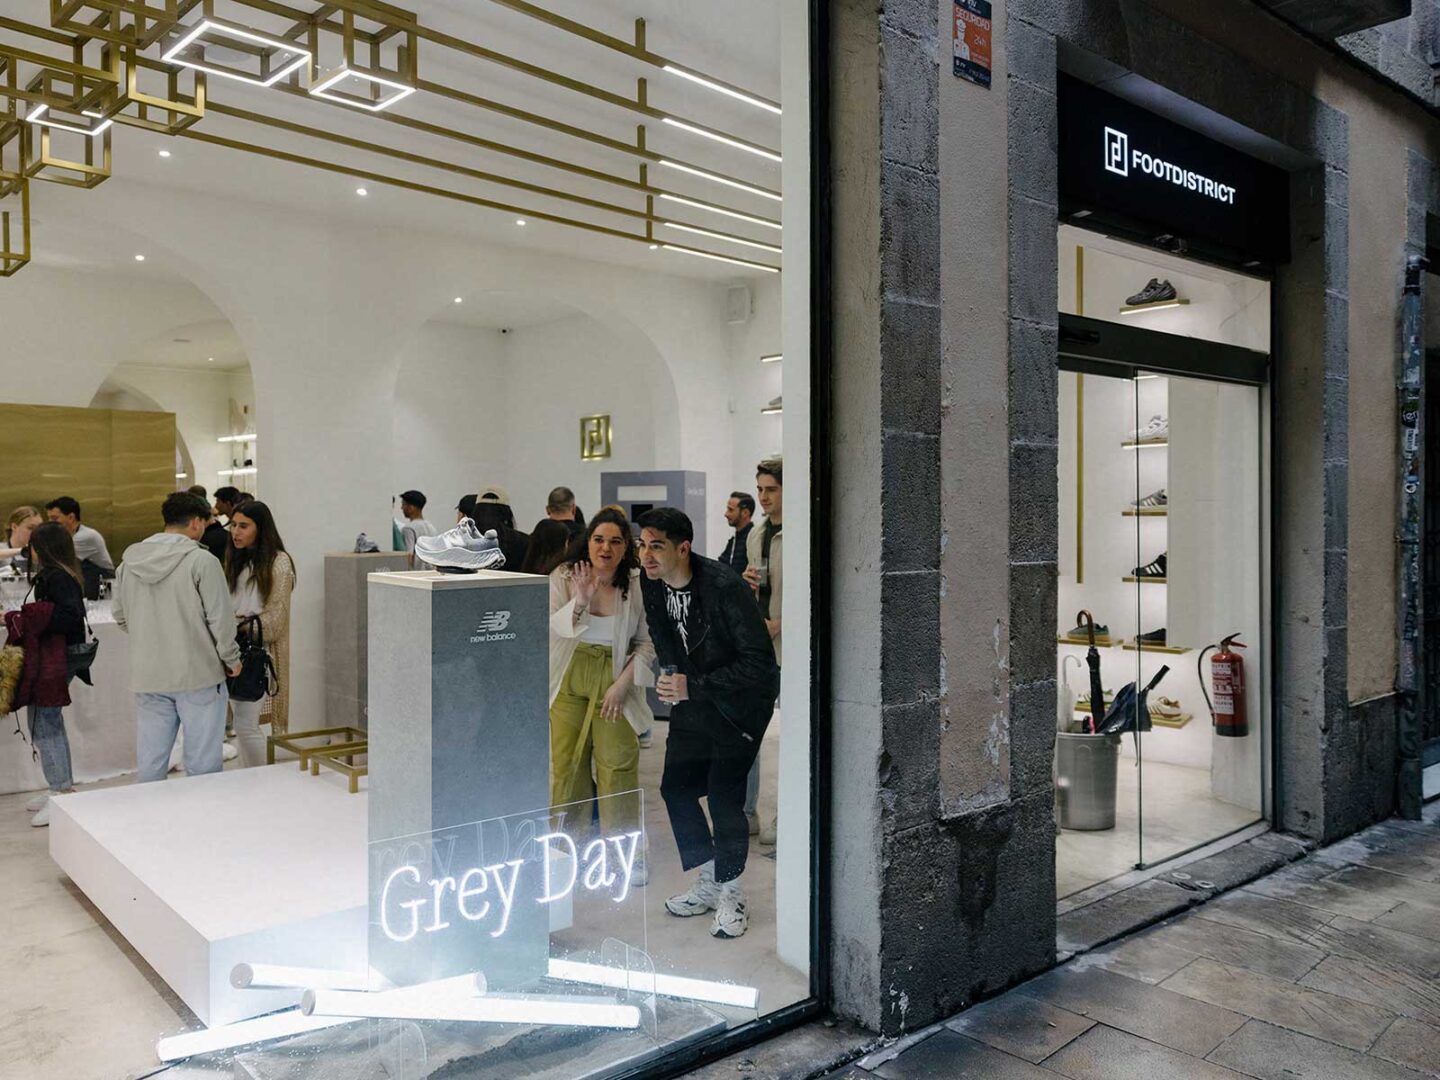 FOOTDISTRICT and New Balance celebrated Grey Day in Barcelona